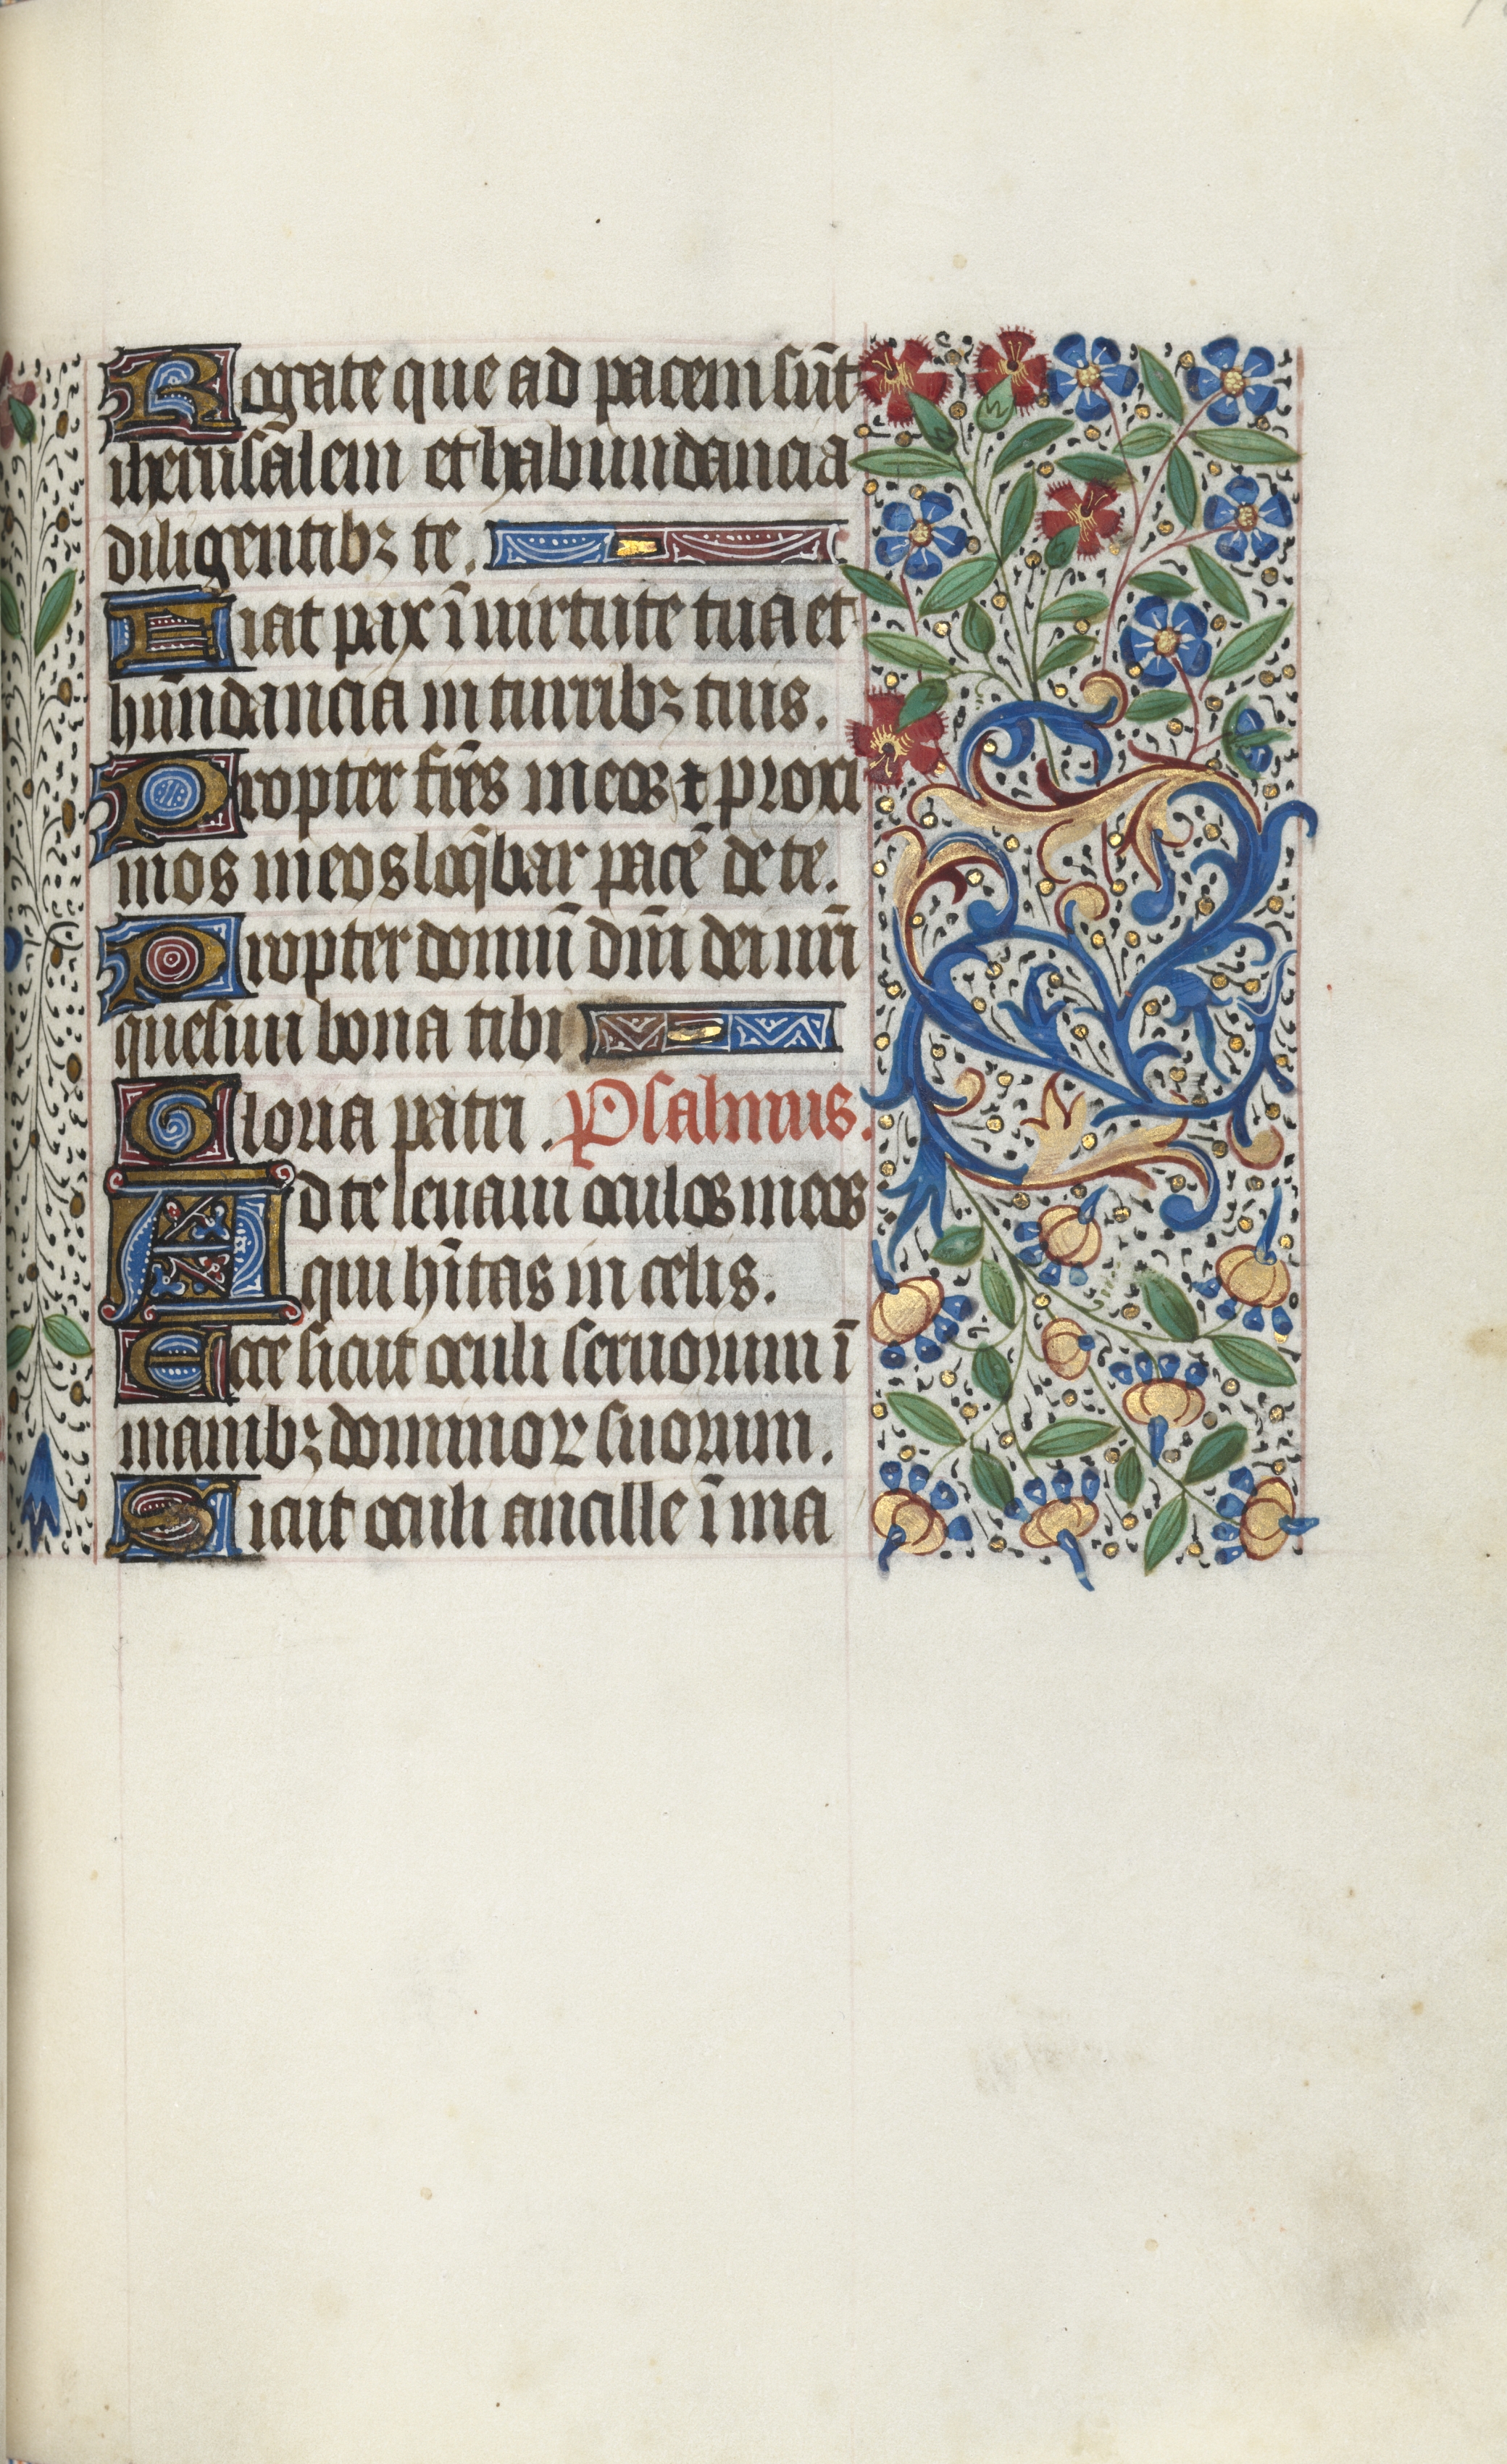 Book of Hours (Use of Rouen): fol. 70r